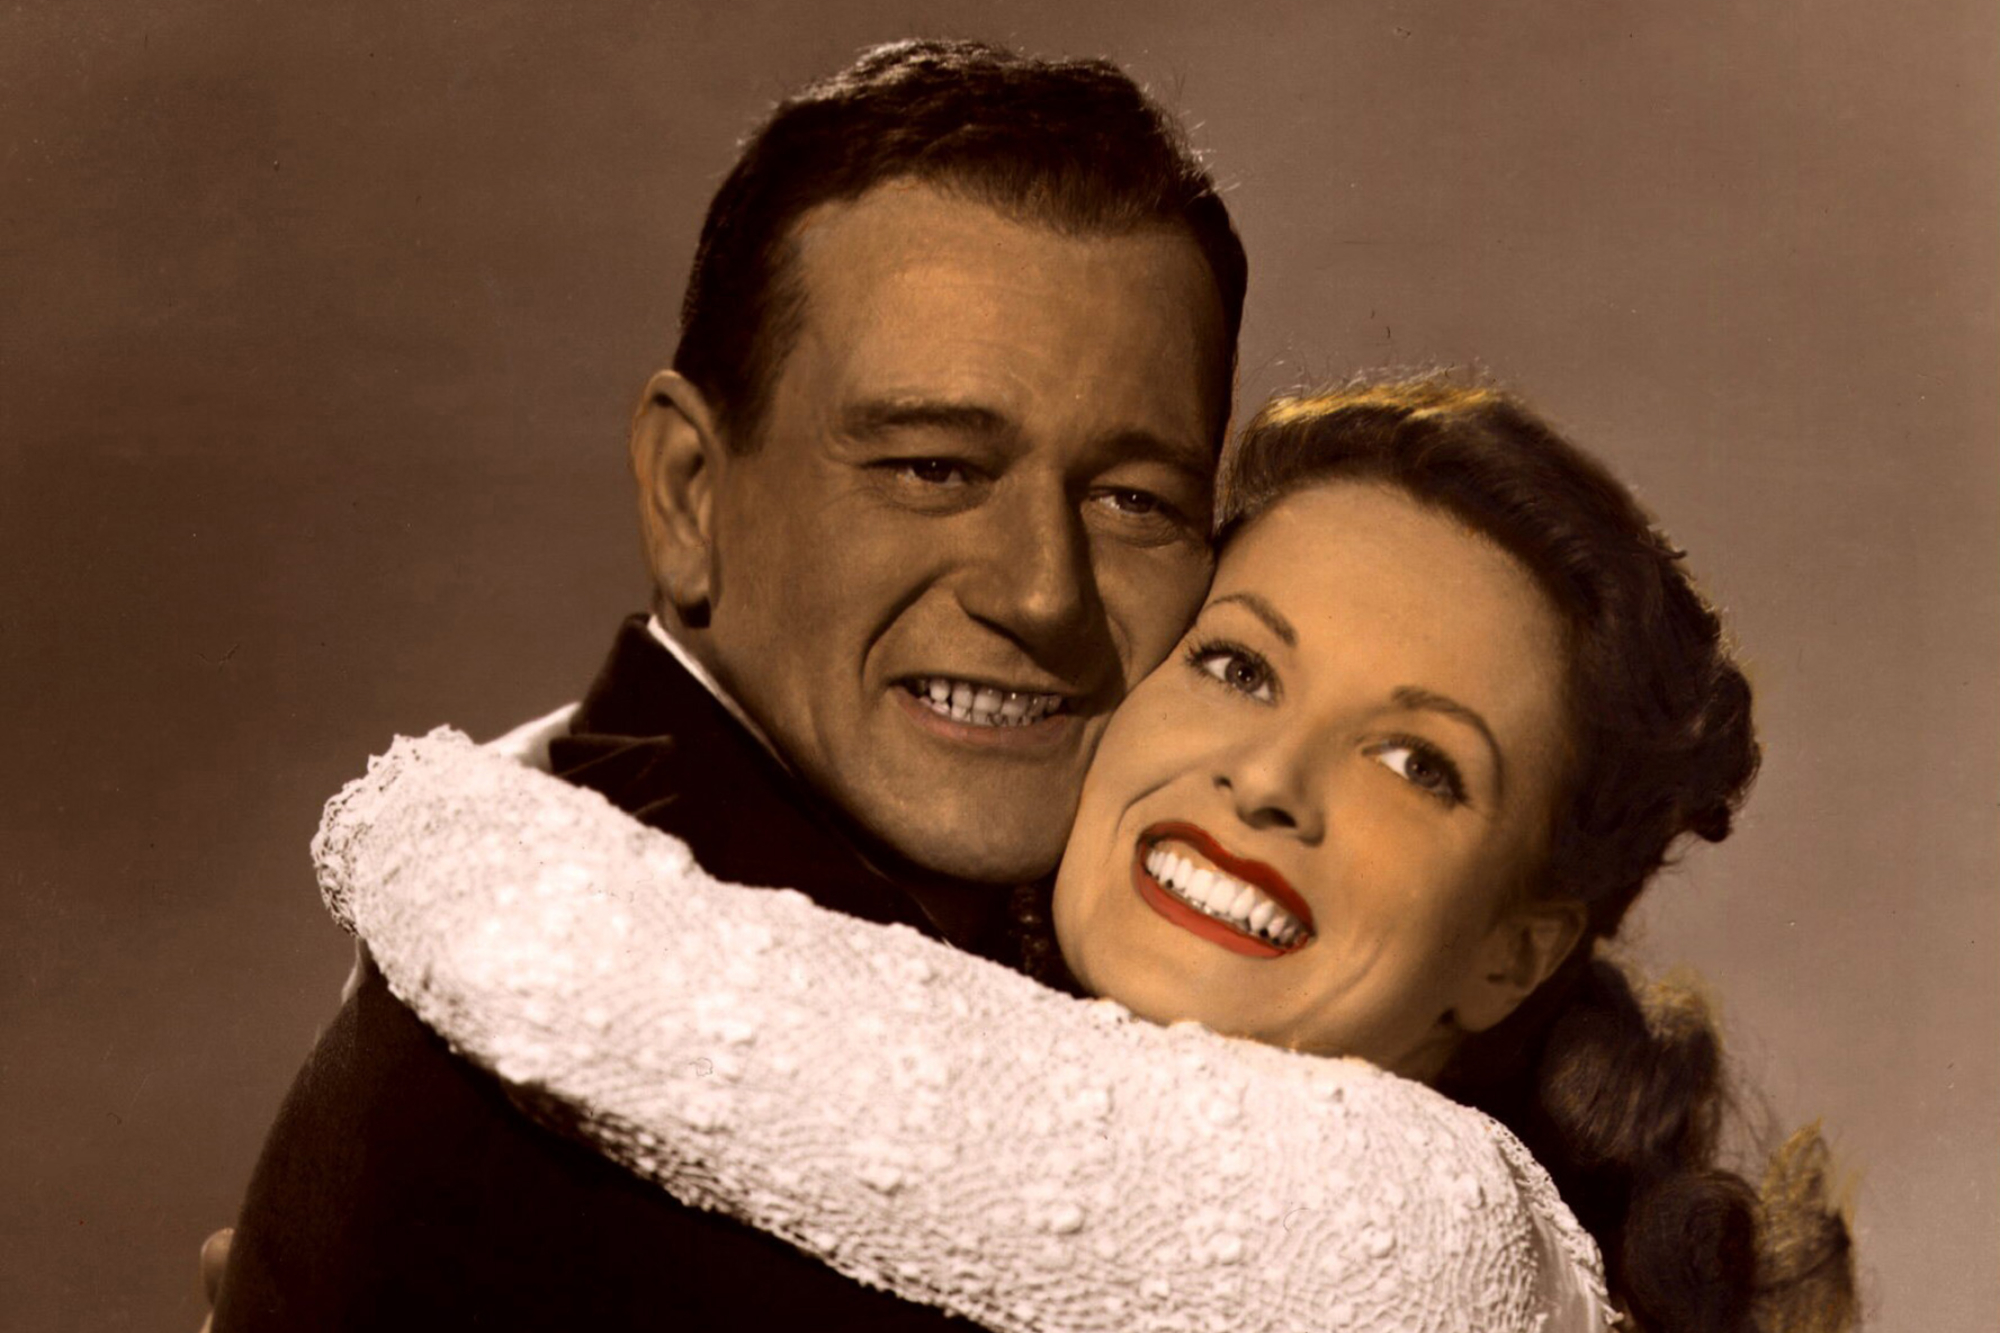 John Wayne Was Used by John Ford to ‘Do All the Things He Wanted to Do Himself’ to Maureen O’Hara During a ‘Passionate Love Scene’